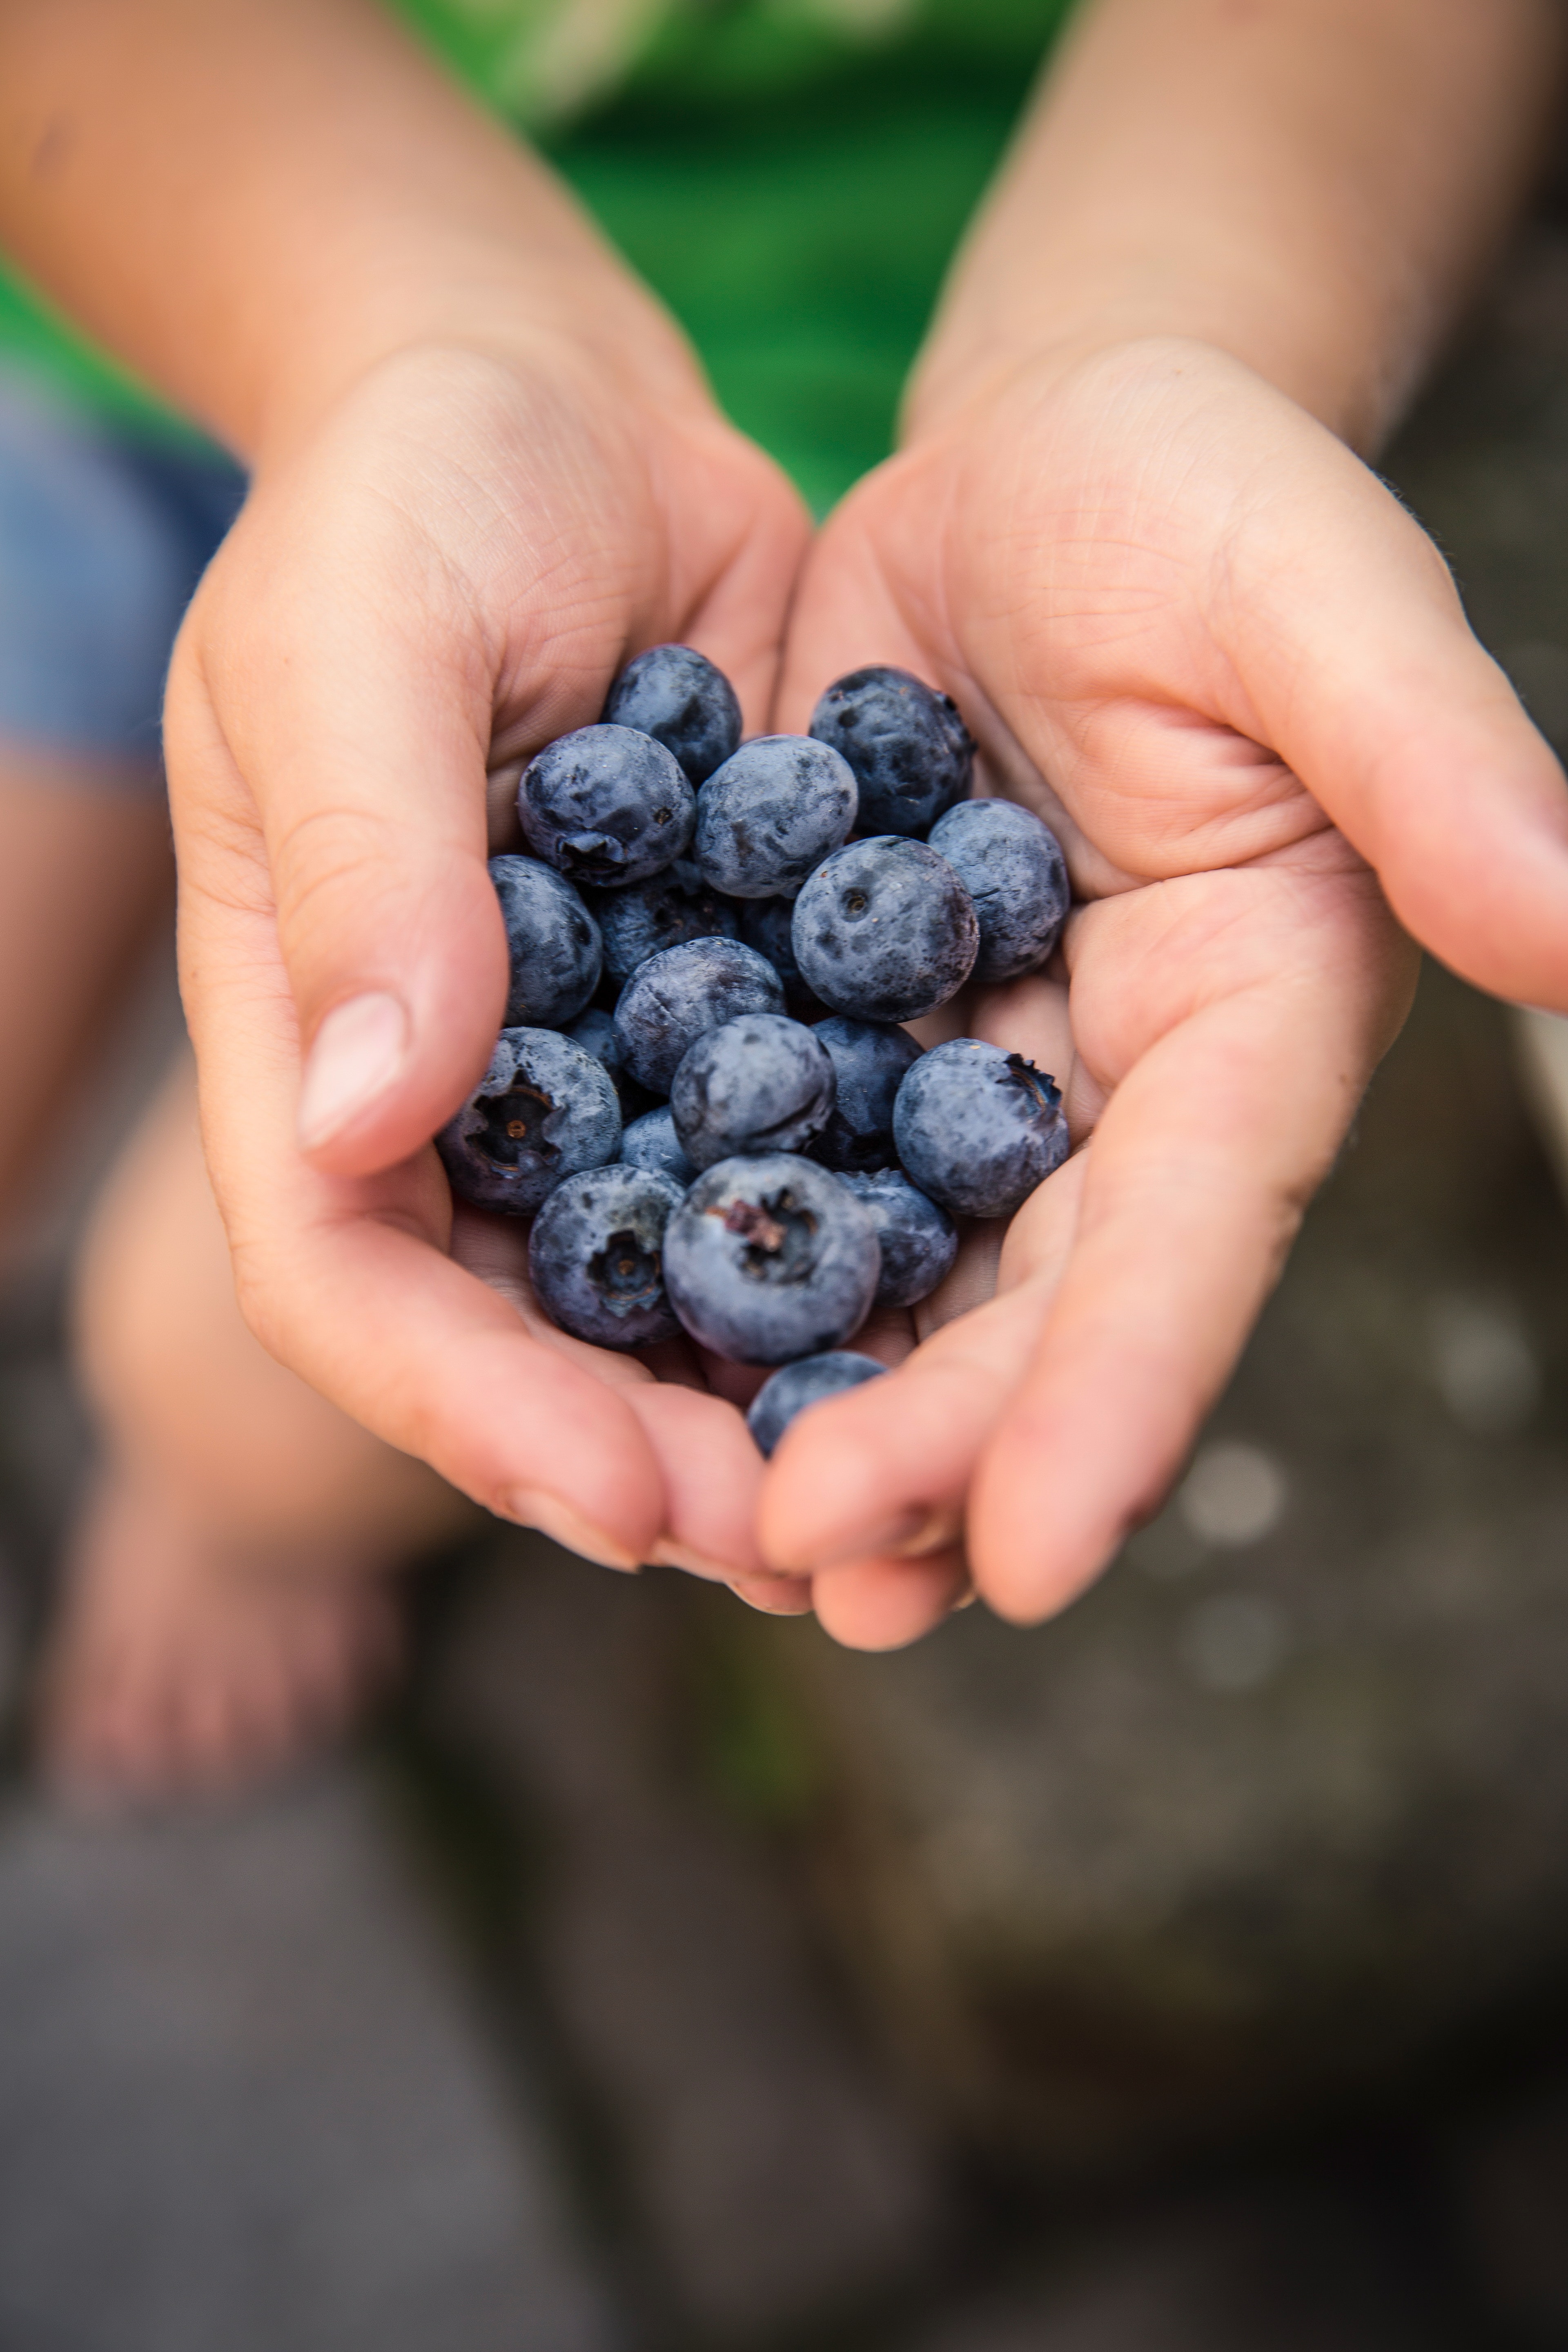 Blueberries on Hand Shallow Focus Photography · Free Stock Photo